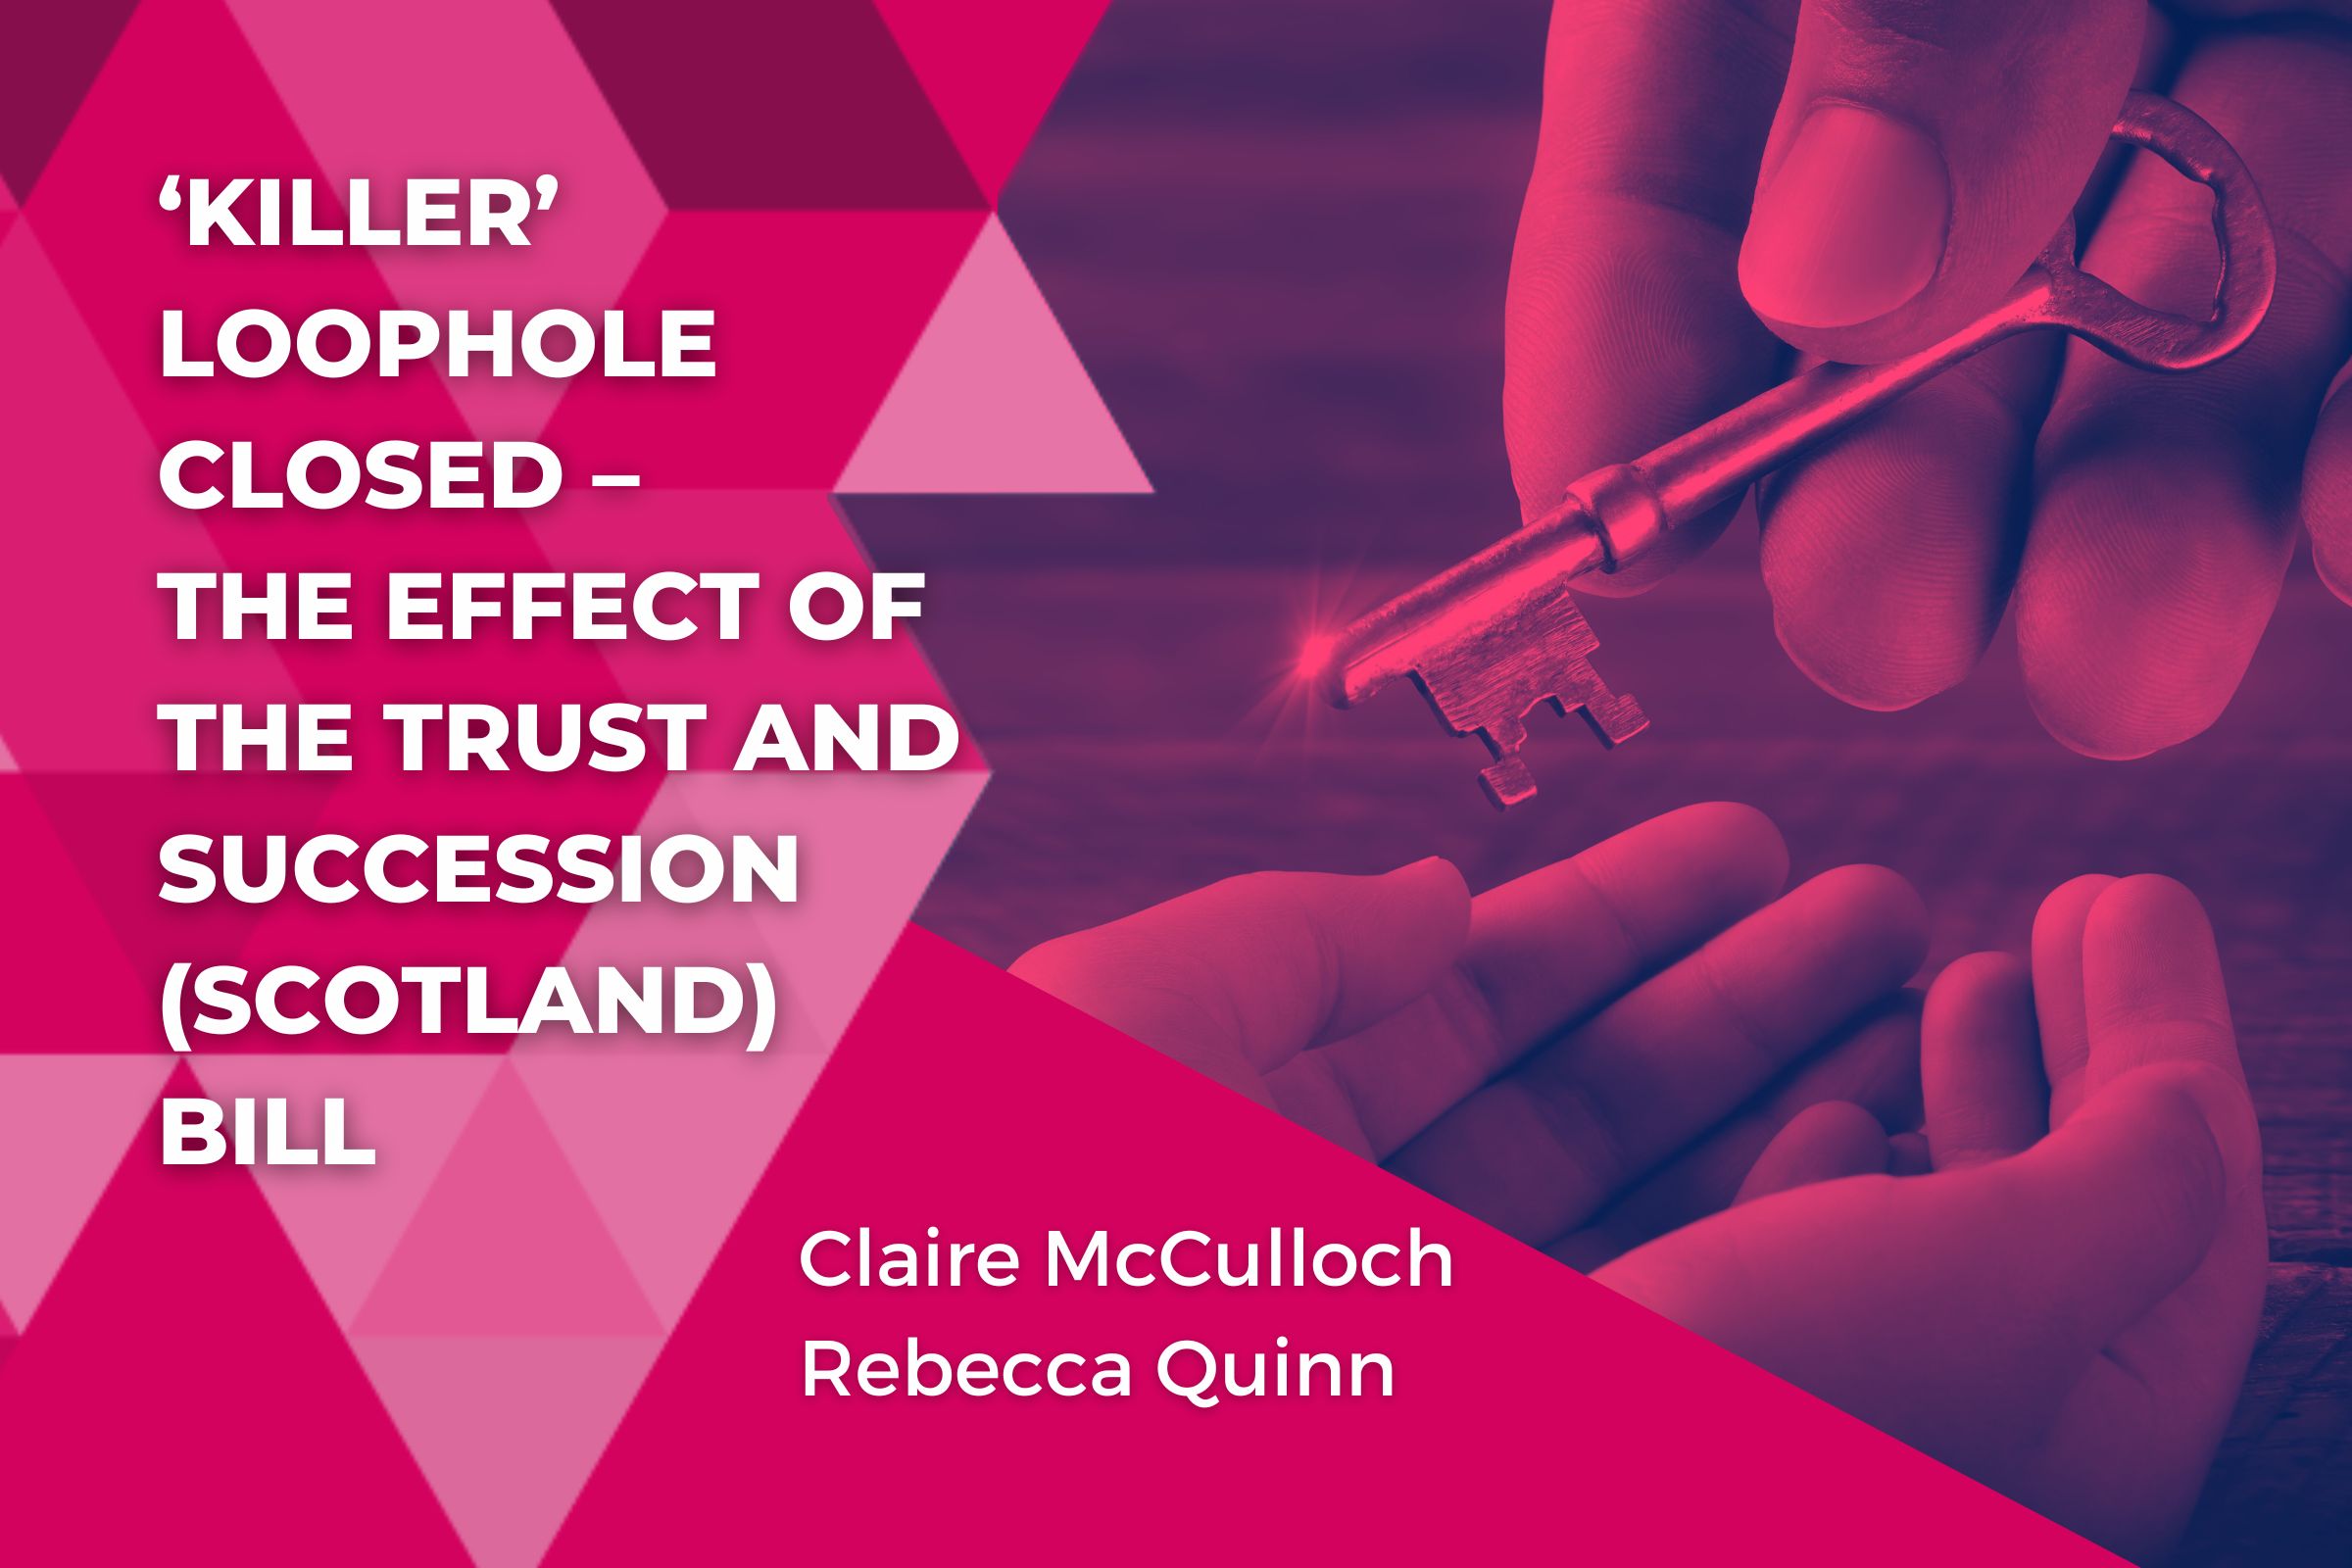 ‘Killer’ Loophole Closed – The Effect of The Trust and Succession (Scotland) Bill